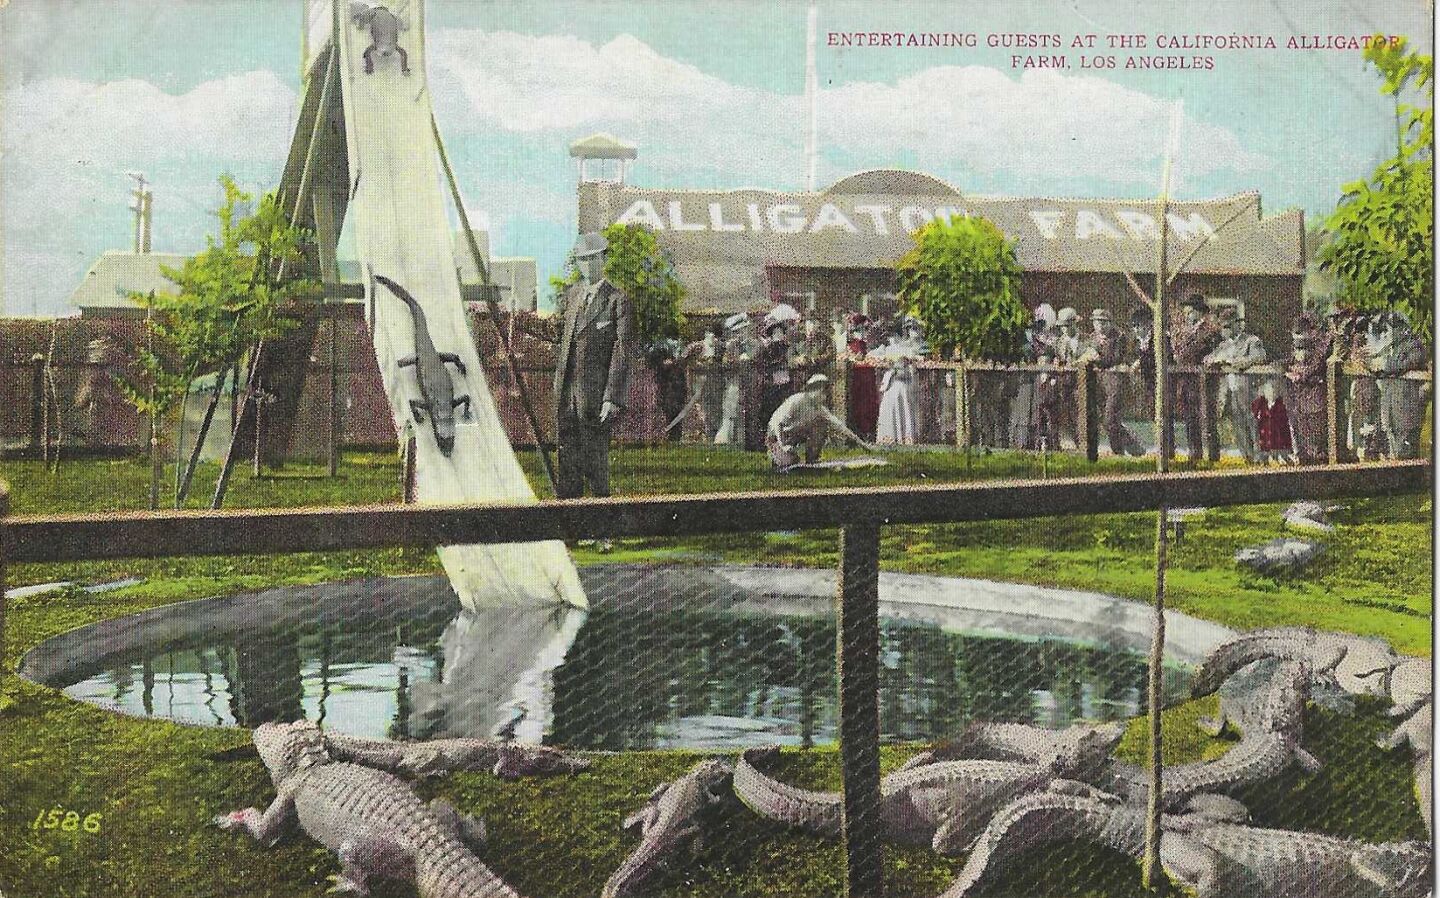 The alligators are entertaining the guests on this vintage postcard, but one wonders how the gators got to the top of the slide.